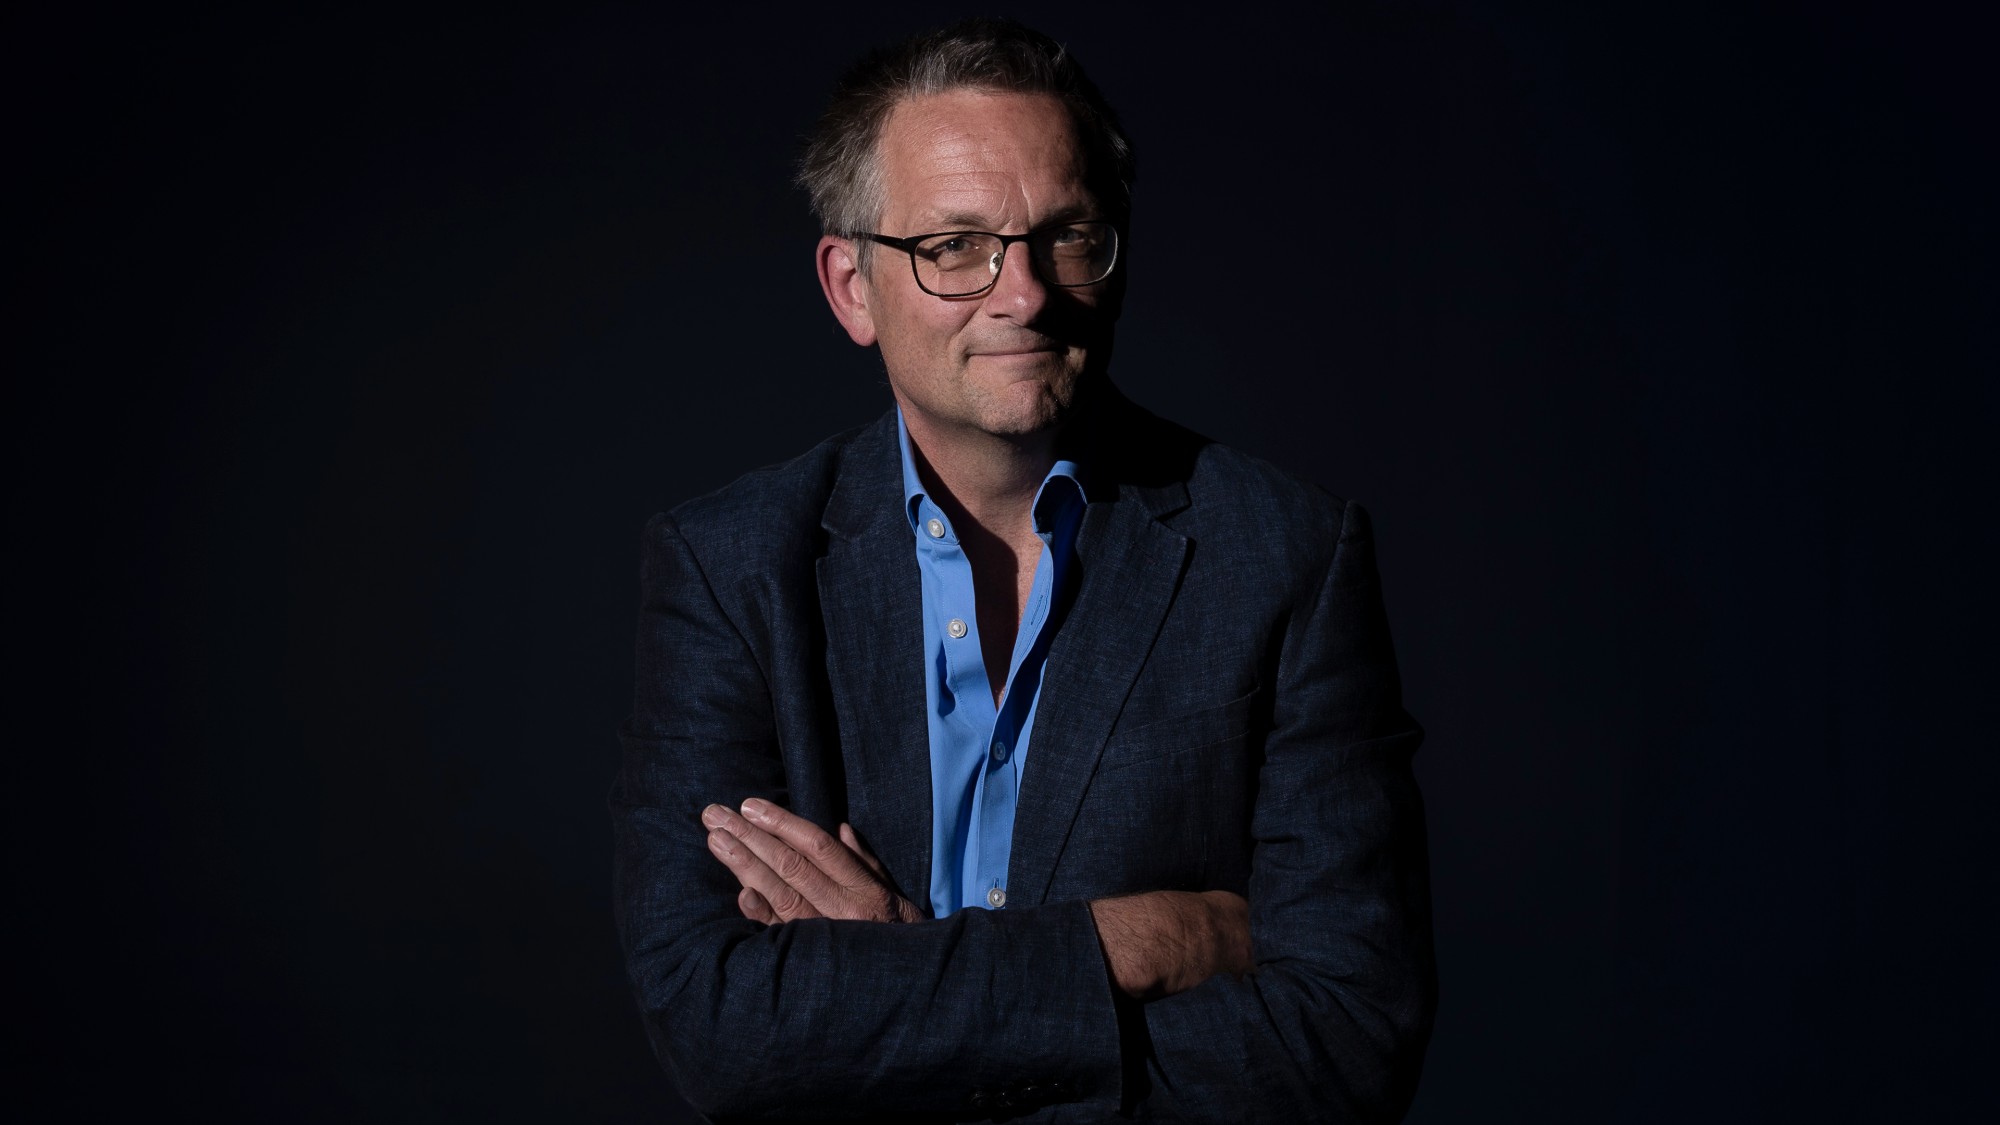 Michael Mosley obituary: TV doctor whose work changed thousands of lives